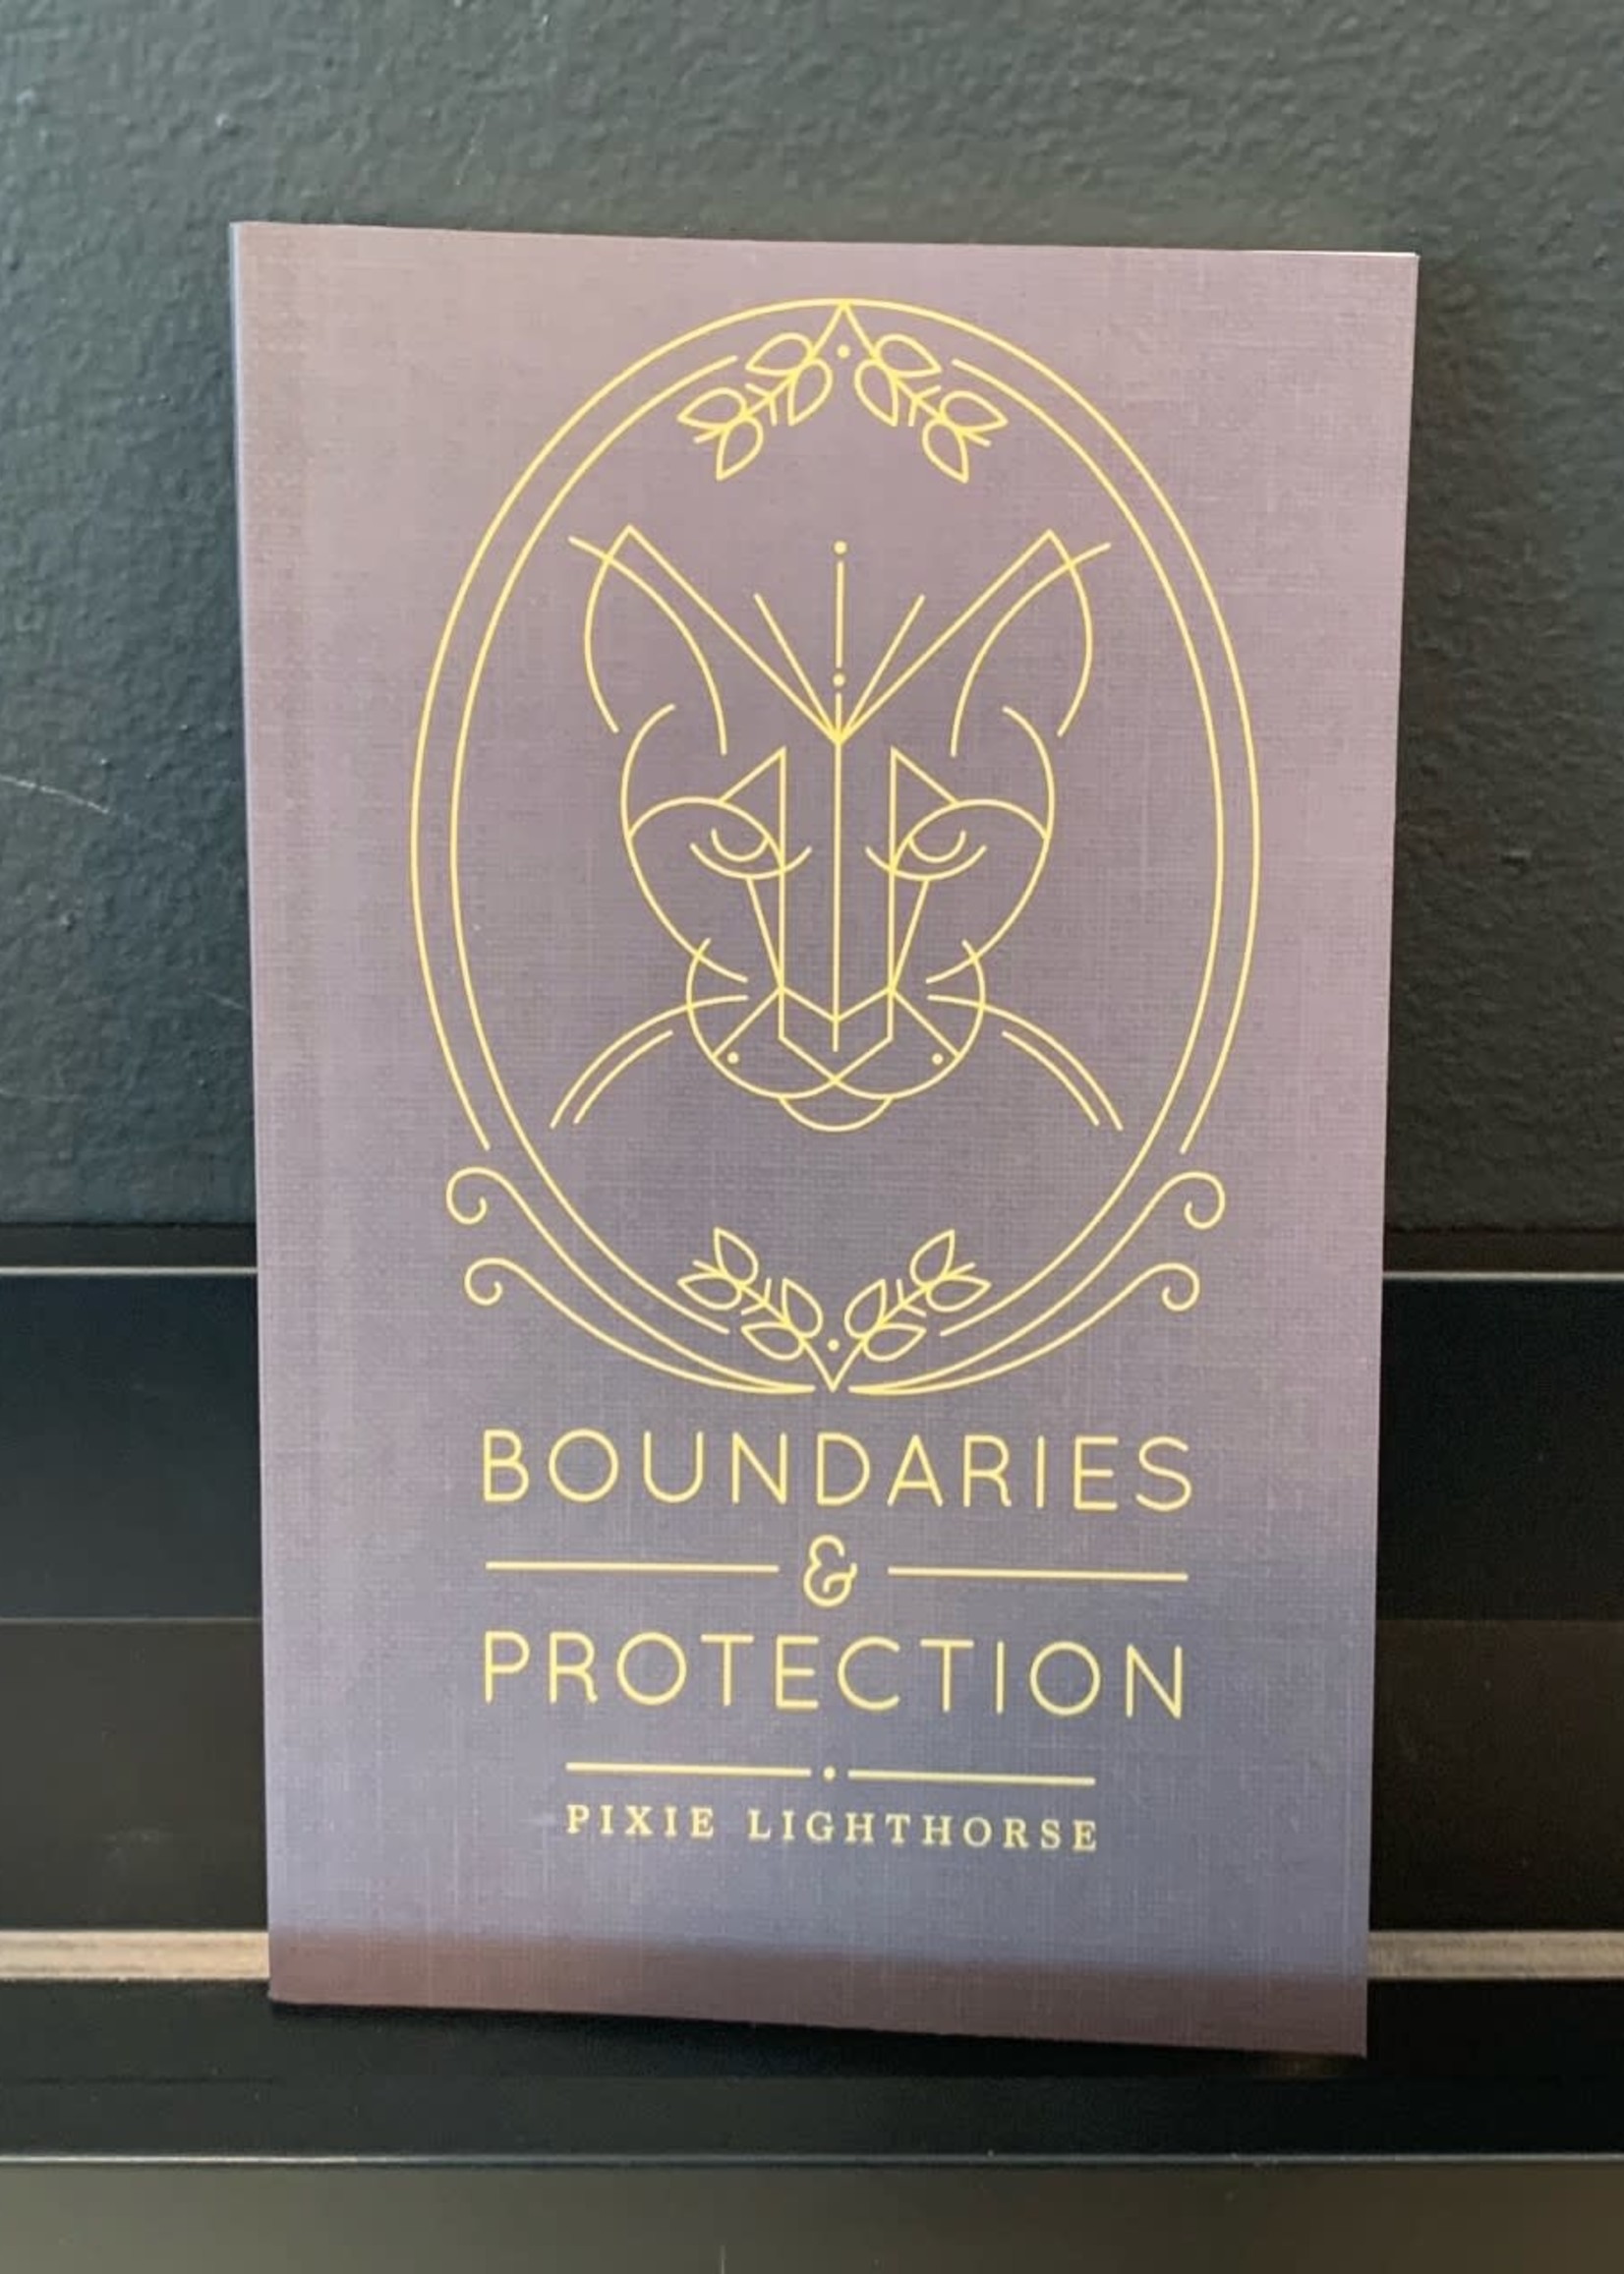 Boundaries and Protection by Pixie Lighthorse